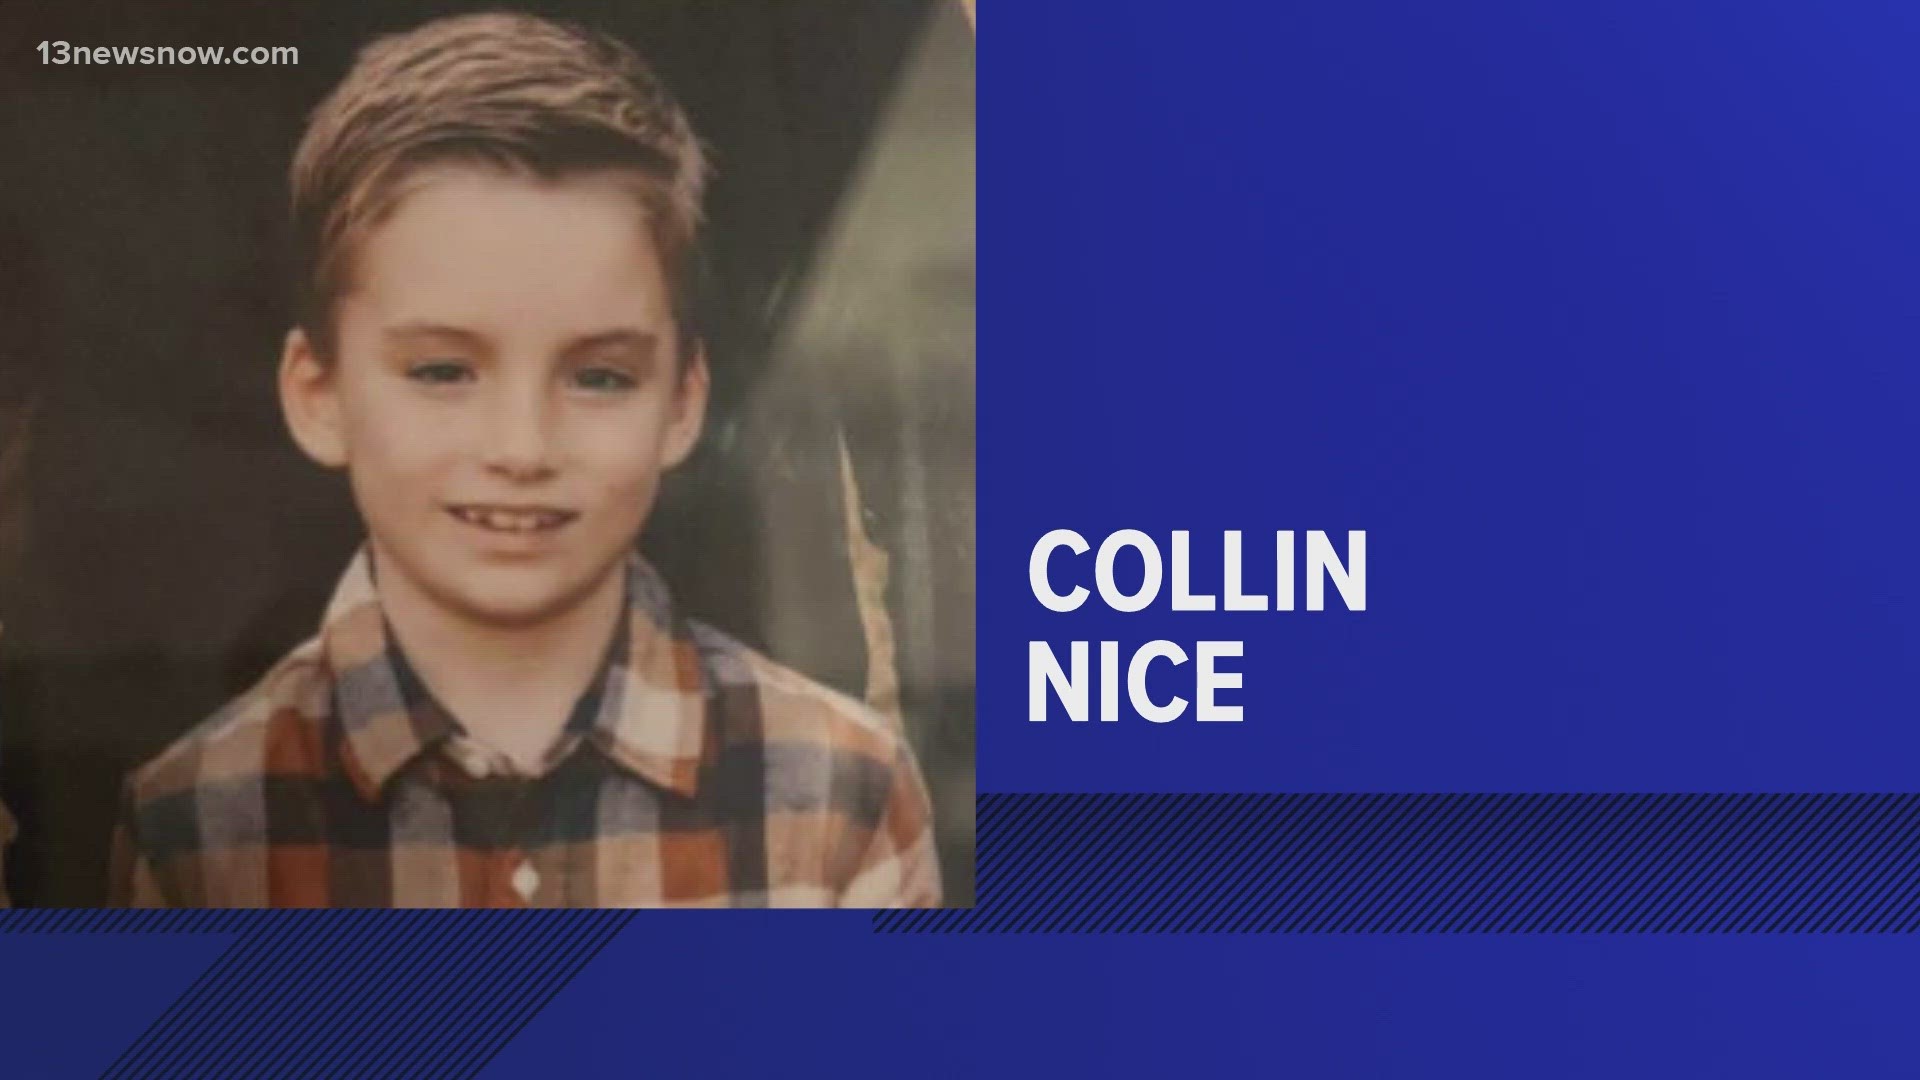 A missing boy has been found safe.